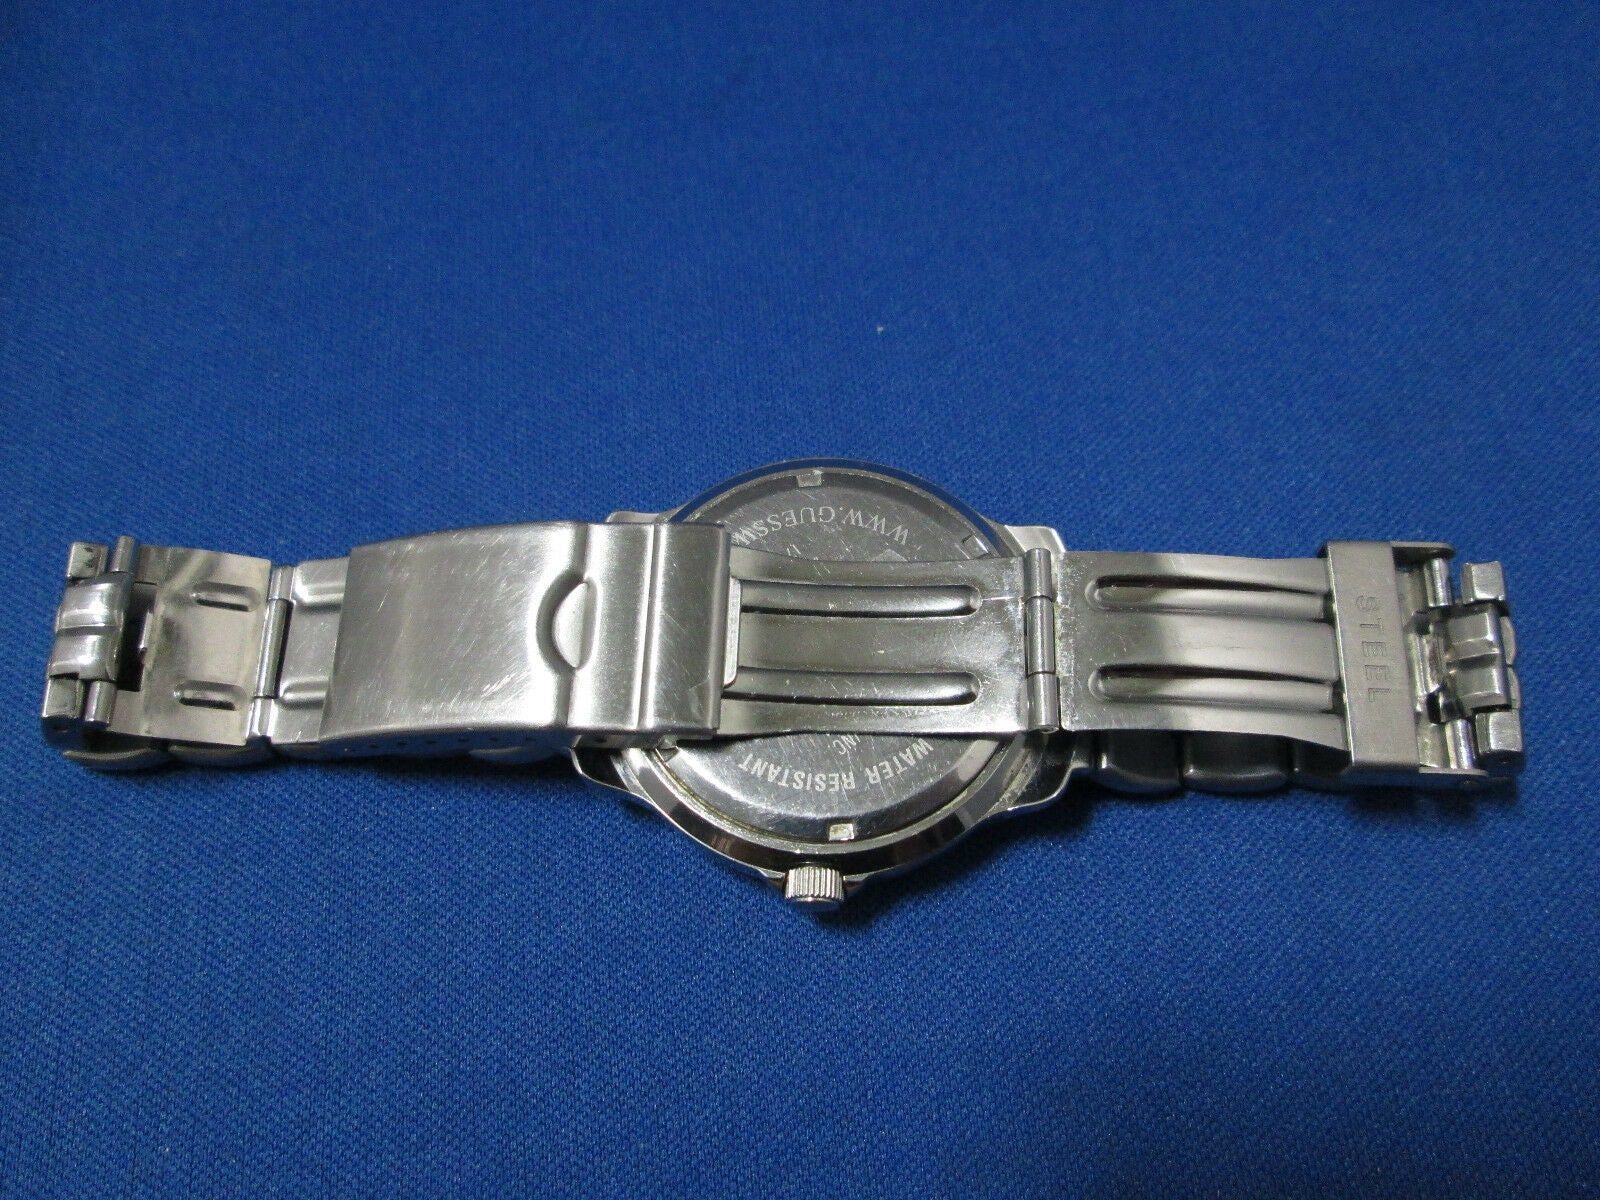 Guess Steel Watch 10ATM, Stainless Steel Japan Movement, I70417g2 - Etsy